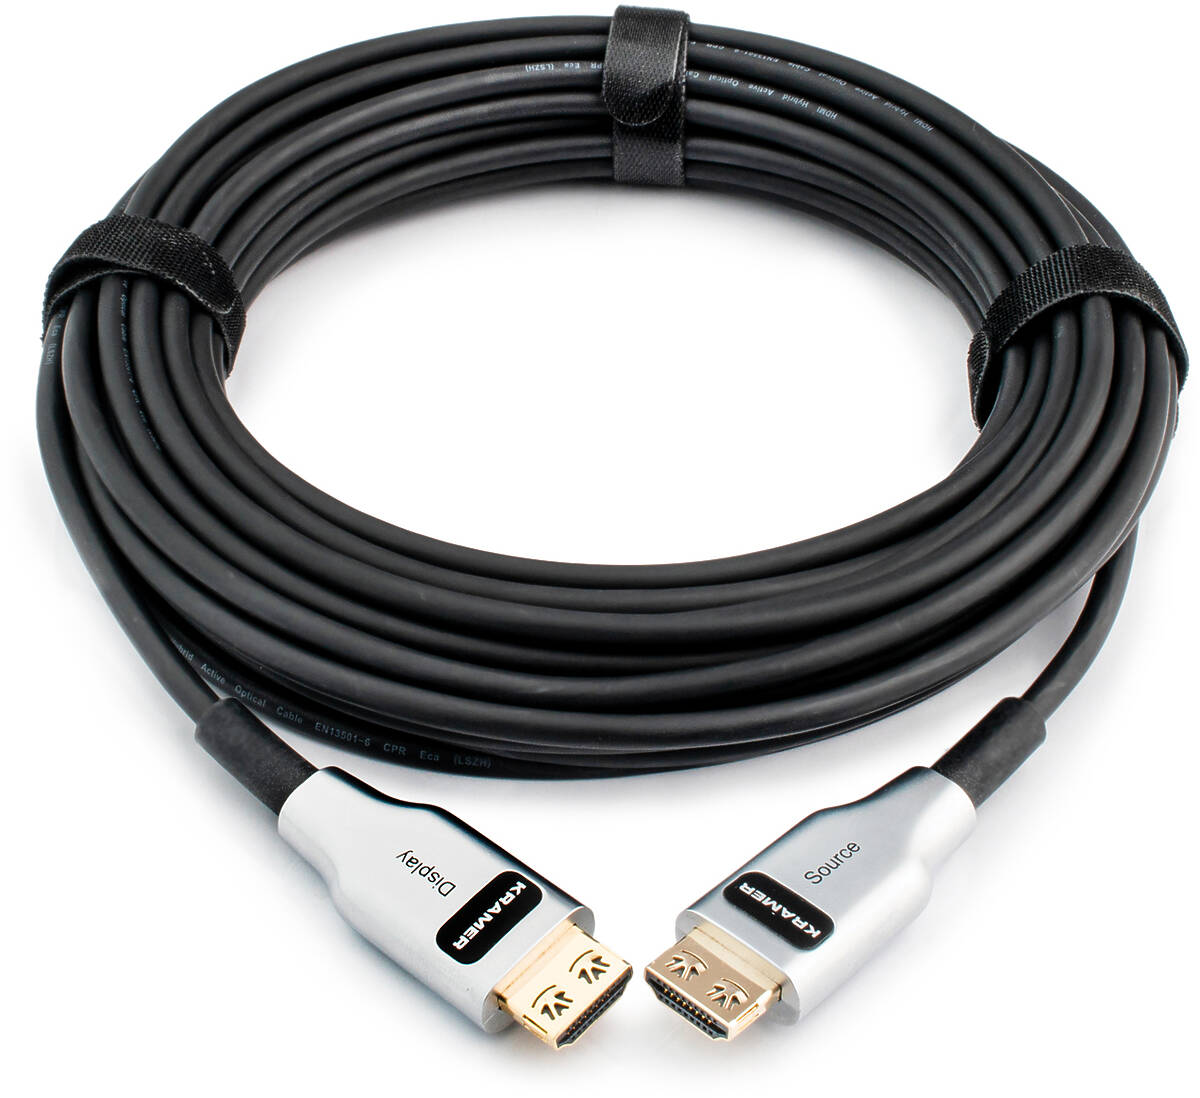 CLS-AOCH/60F-98 30.00m Kramer CLS-AOCH/60F cable product image. Click to enlarge.